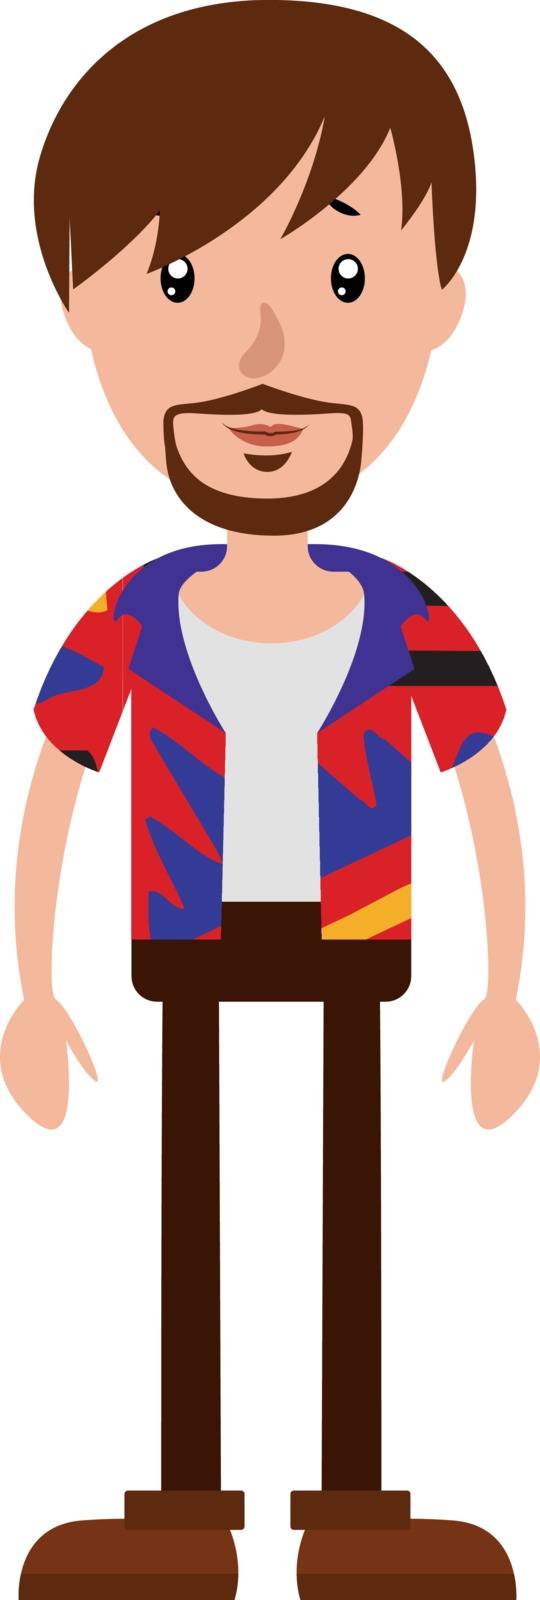 The young man with a colorful shirt illustration vector on white background